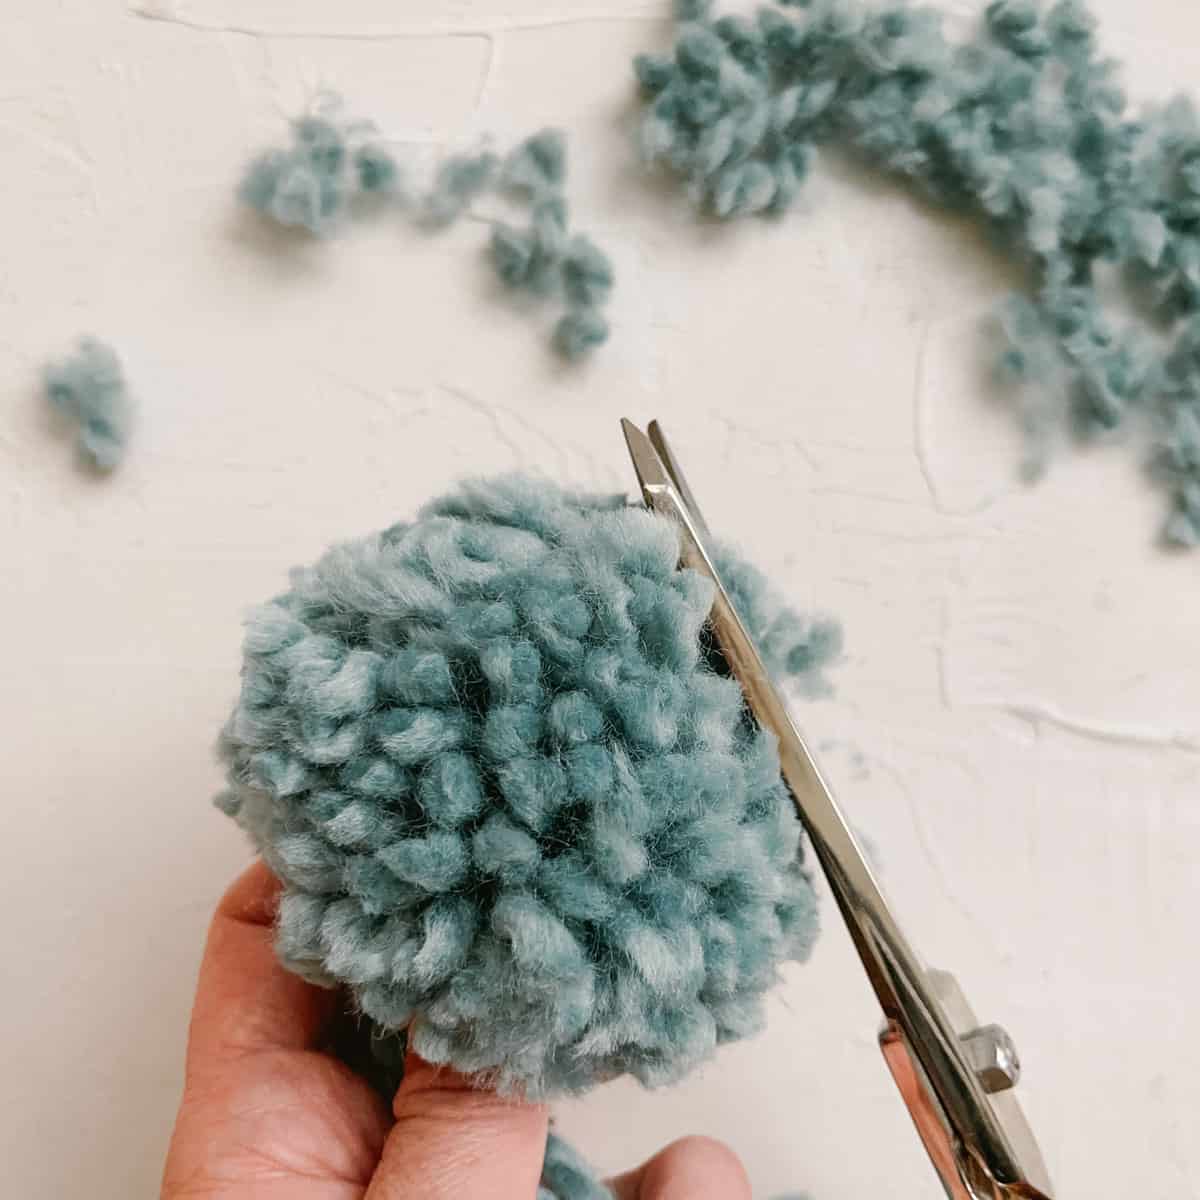 A handmade yarn pom pom being trimmed with gold scissors.